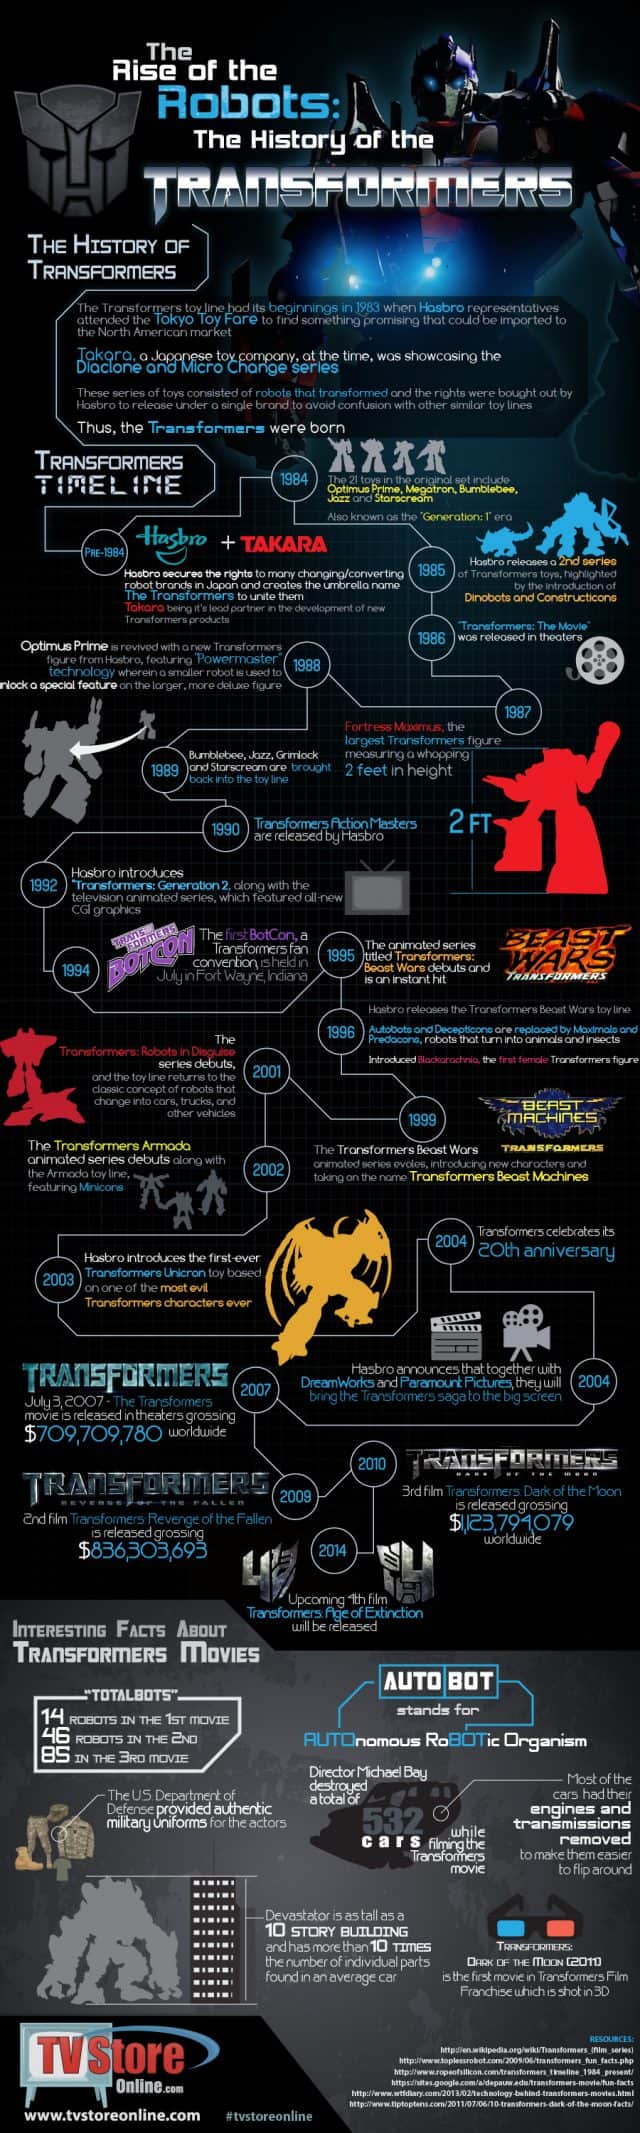 History Of Tranformers Infographic